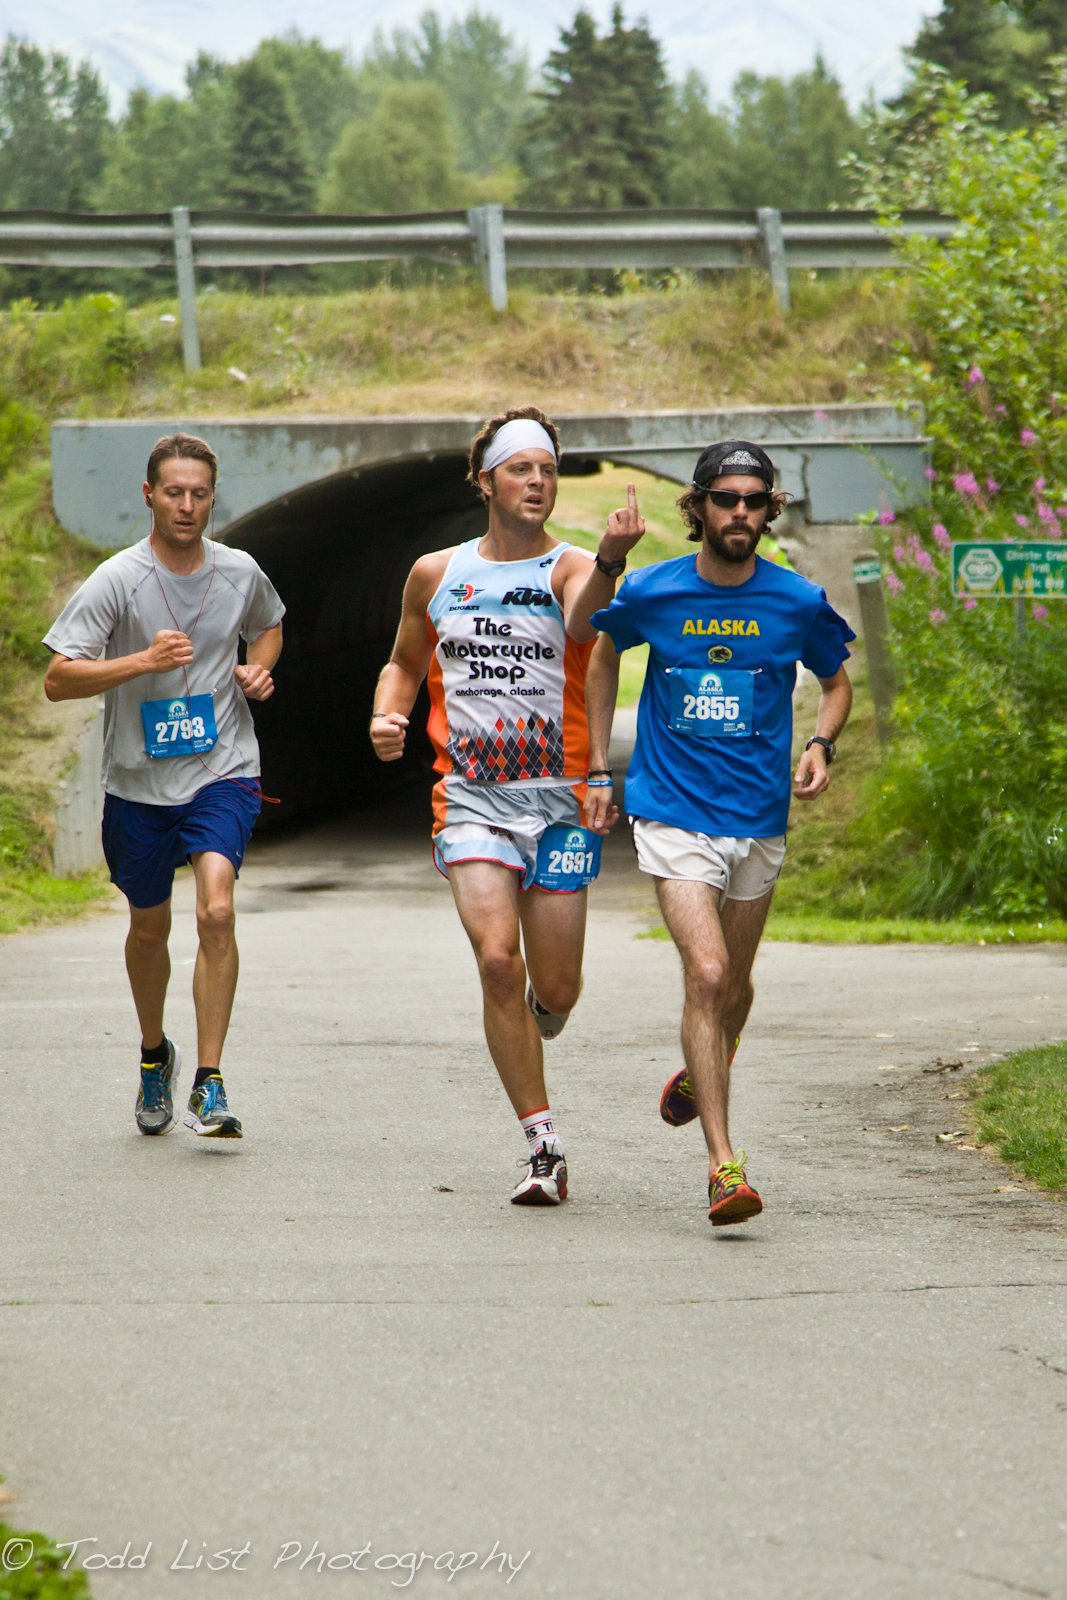 2013 LetsRun.com Photo of the Year (Zack Johnson (flipper), Andrew Ritchie (flippee)) photo by Todd List of Todd List Photography 